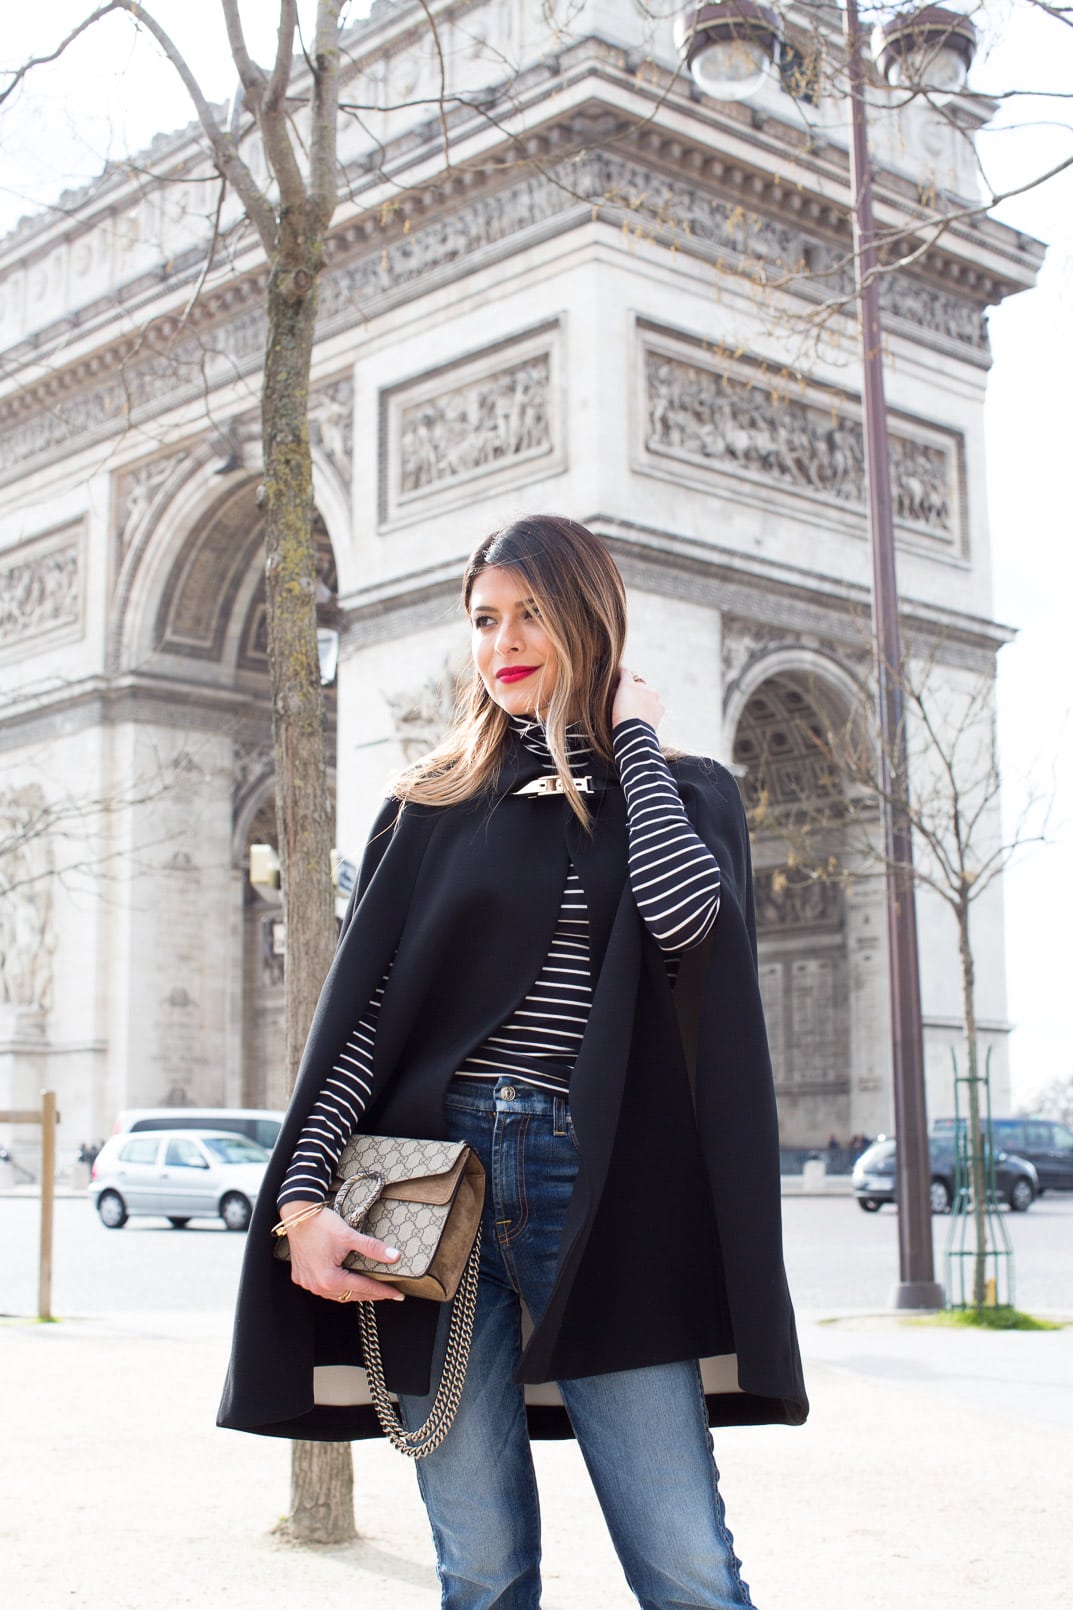 Pam Hetlinger wearing a Kate Spade Jenji Capelet, striped turtleneck, 7 for all Mankind skinny cropped jeans, Gucci Dionysus GG Supreme shoulder bag and balenciage buckle booties. Paris Fashion Week.